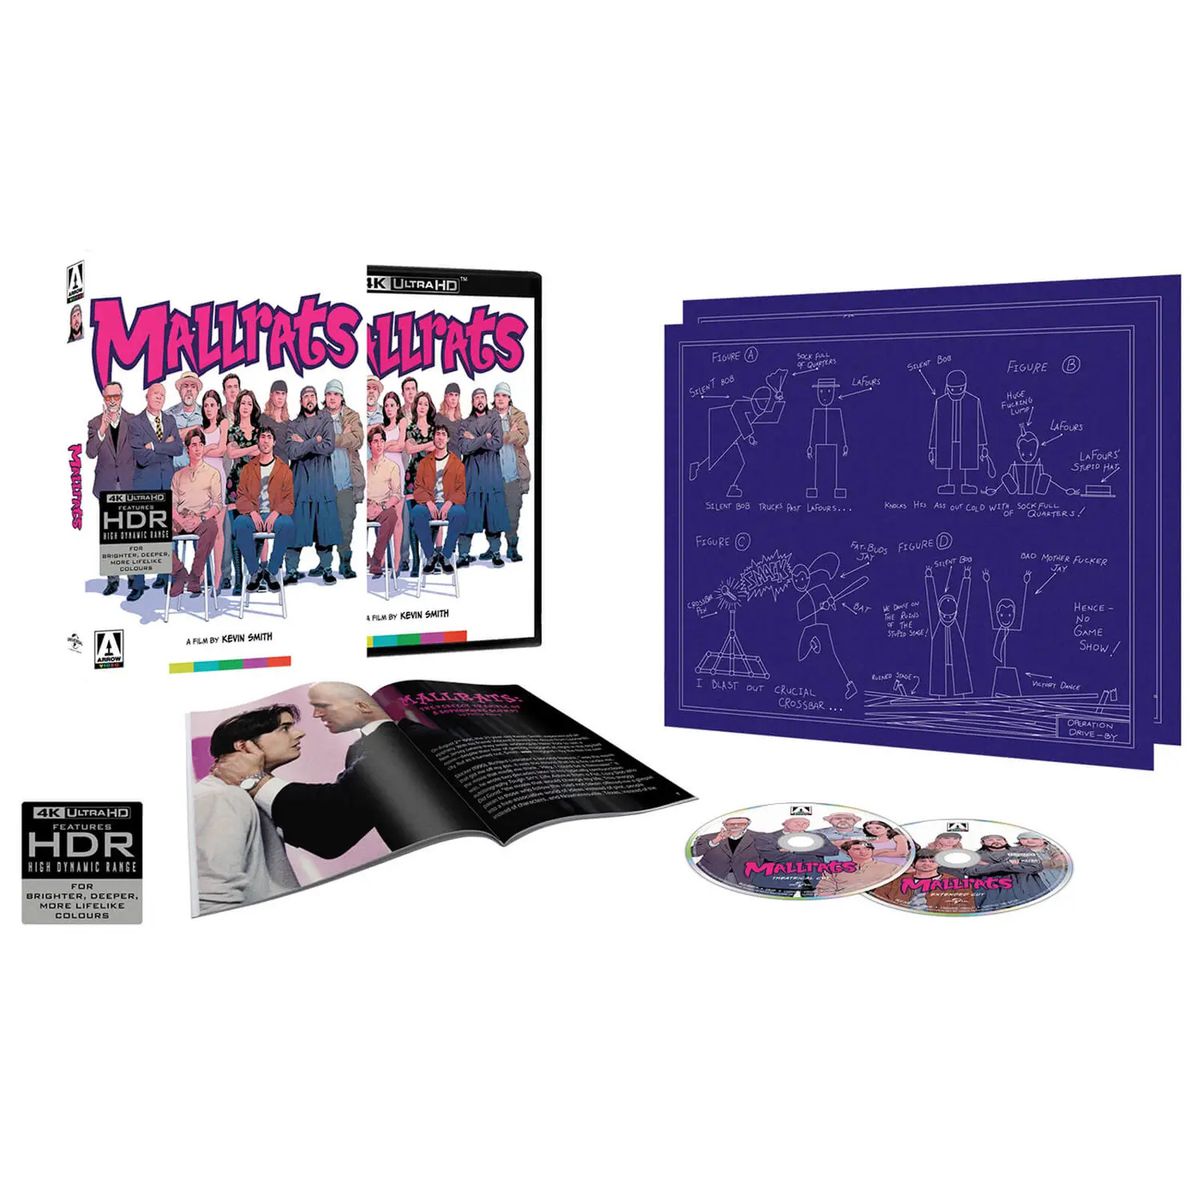 A special edition of Mallrats from Arrow video that includes multiple Blu-rays, a booklet, and a diagram of Jay and Silent Bob.